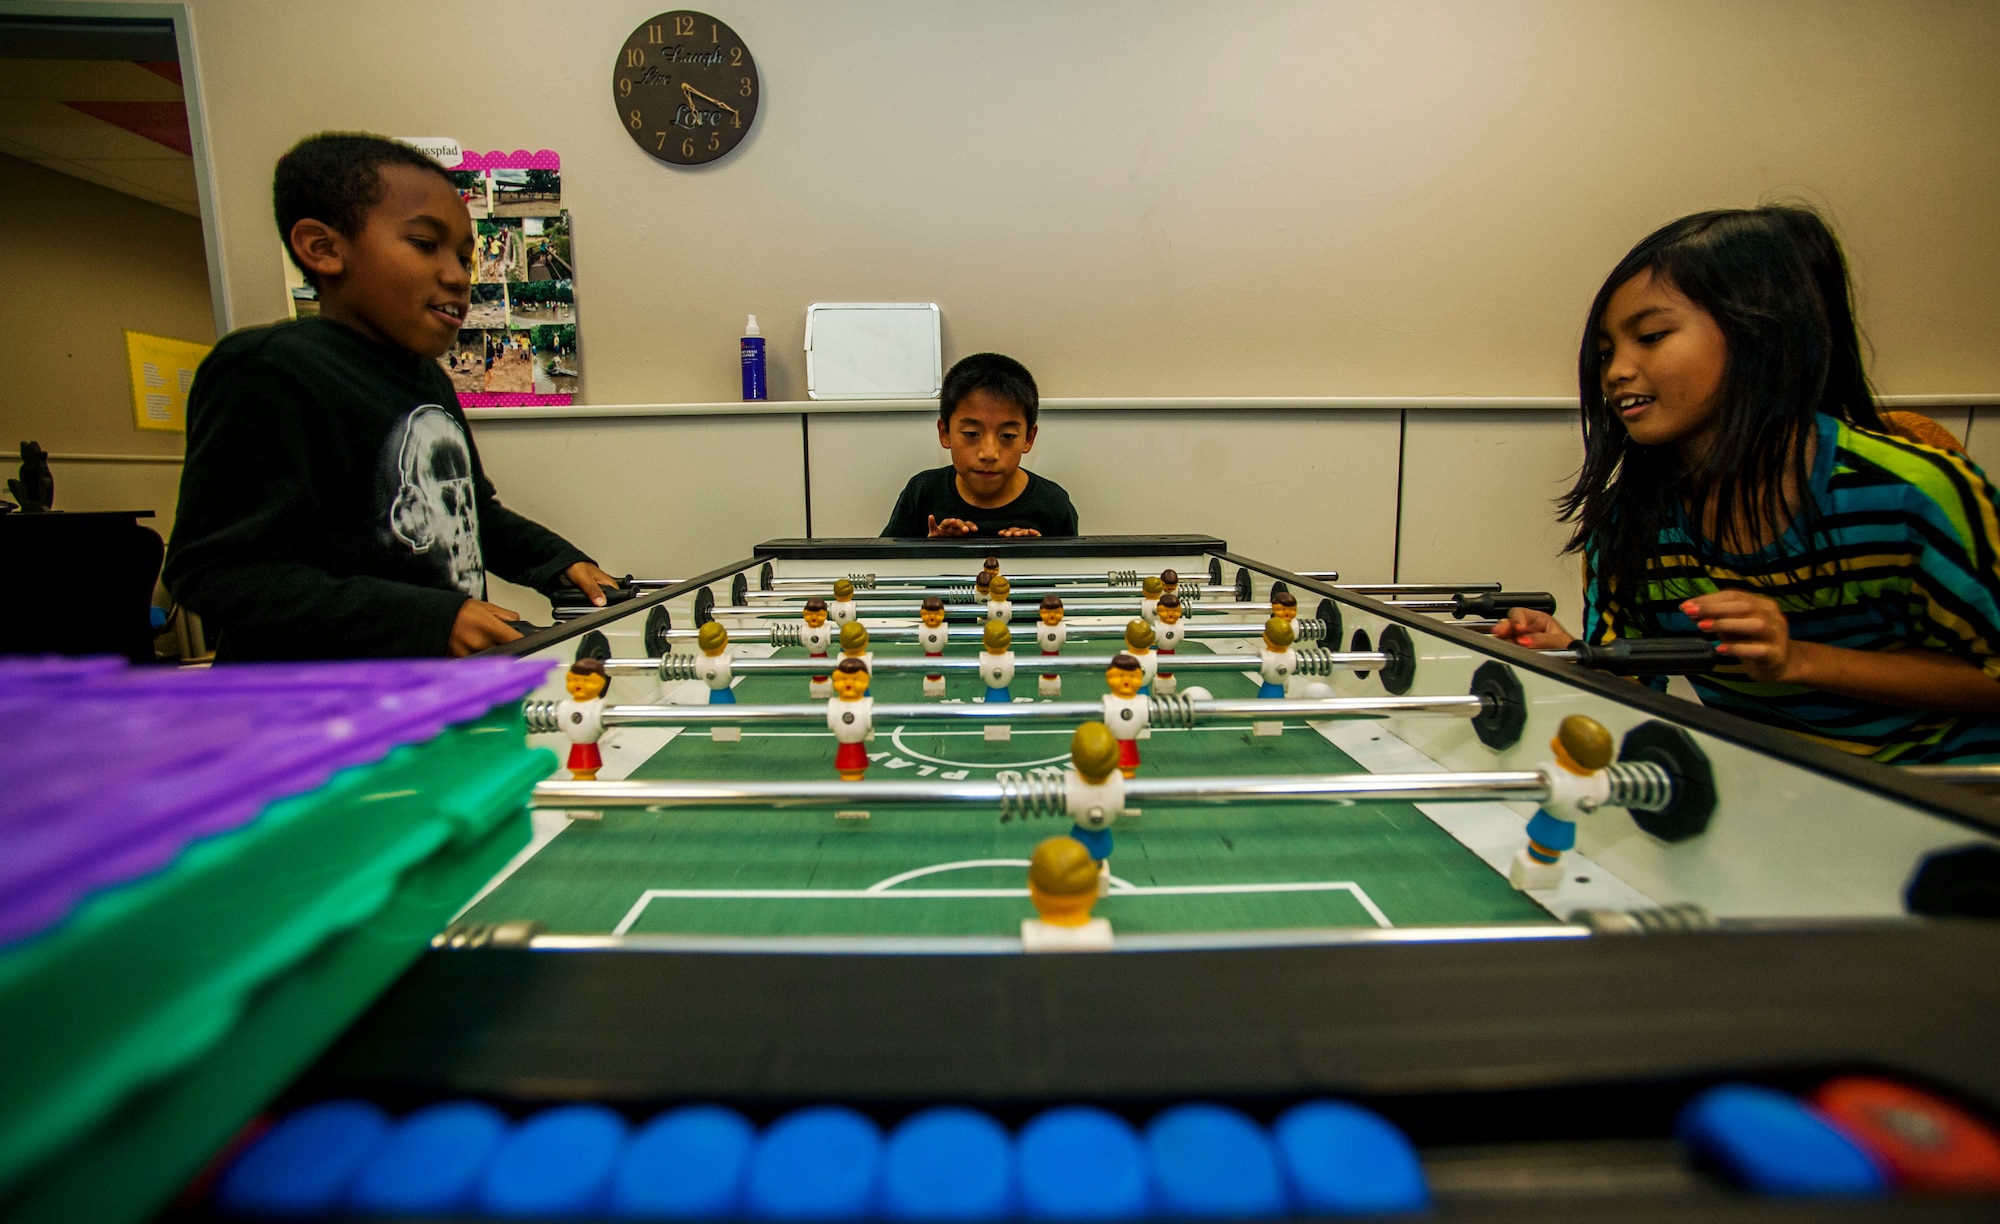 Jayden Johnson, left, Augustin Stehley, center, and Jhen Li Bangi play a game of foosball during the Power Hour in the School Age Program building at Spangdahlem Air Base, Germany, Nov. 10, 2015. The facility contains various rooms designed to allow young students to socialize, explore their interests and play together. (U.S. Air Force photo by Airman 1st Class Timothy Kim/Released)